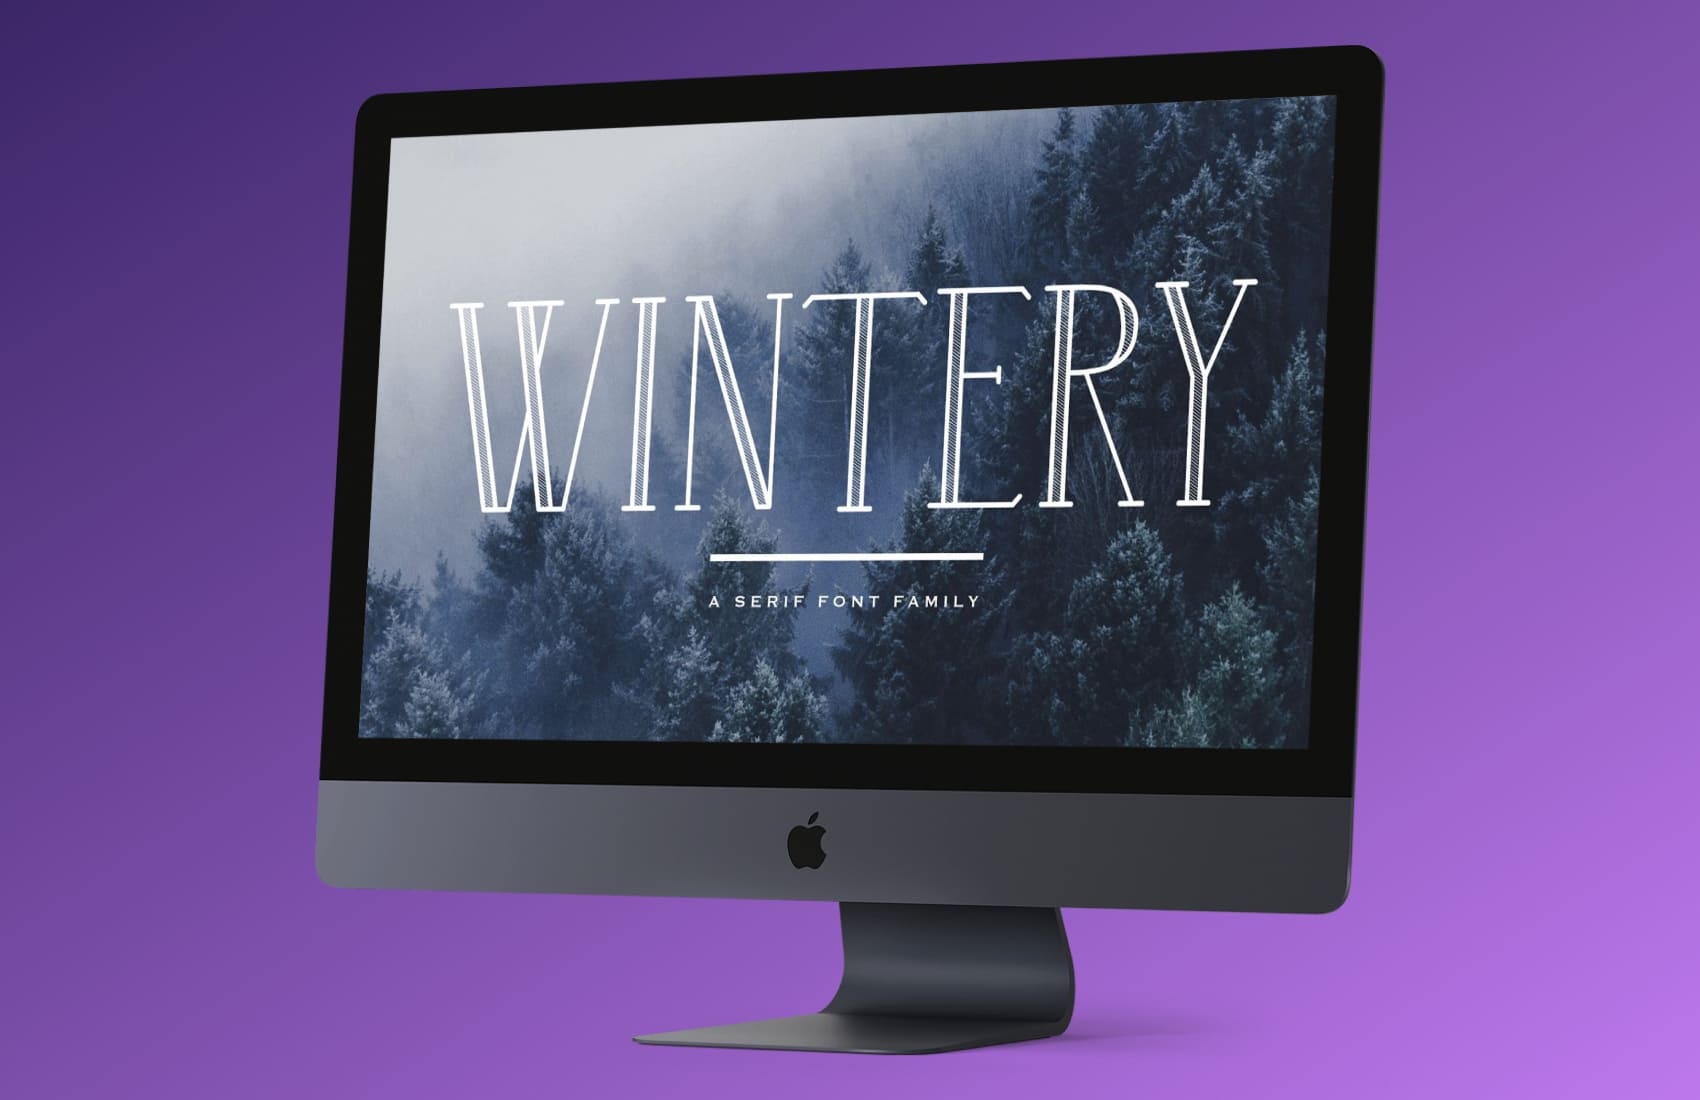 Wintery - A Serif Font Family On The Monoblock.